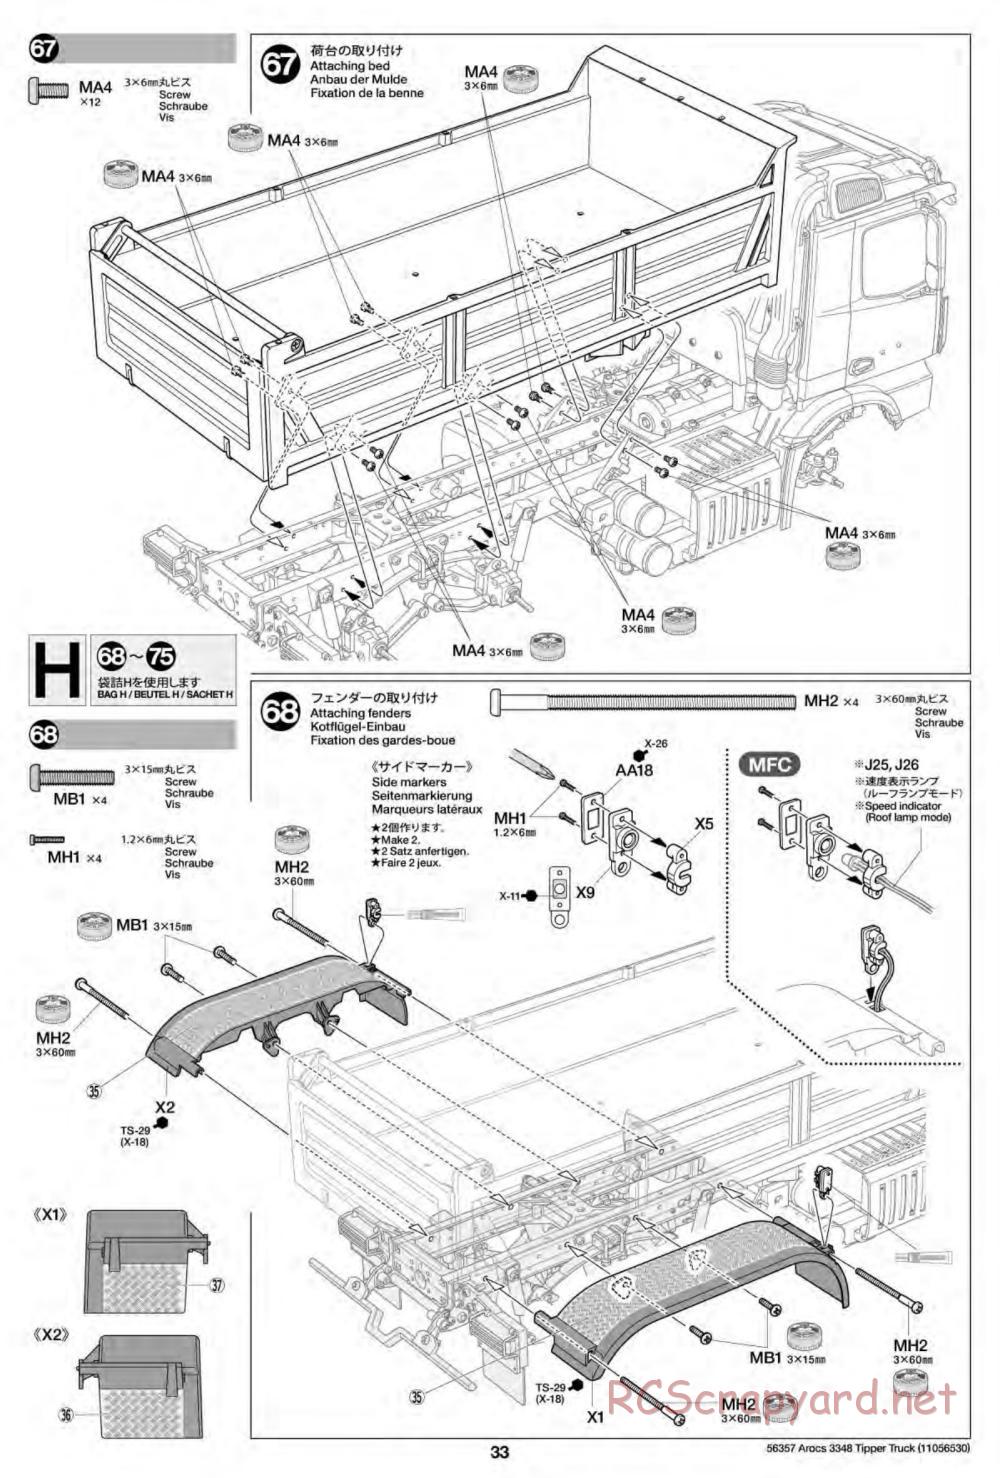 Tamiya - Mercedes-Benz Arocs 3348 6x4 Tipper Truck Chassis - Manual - Page 33